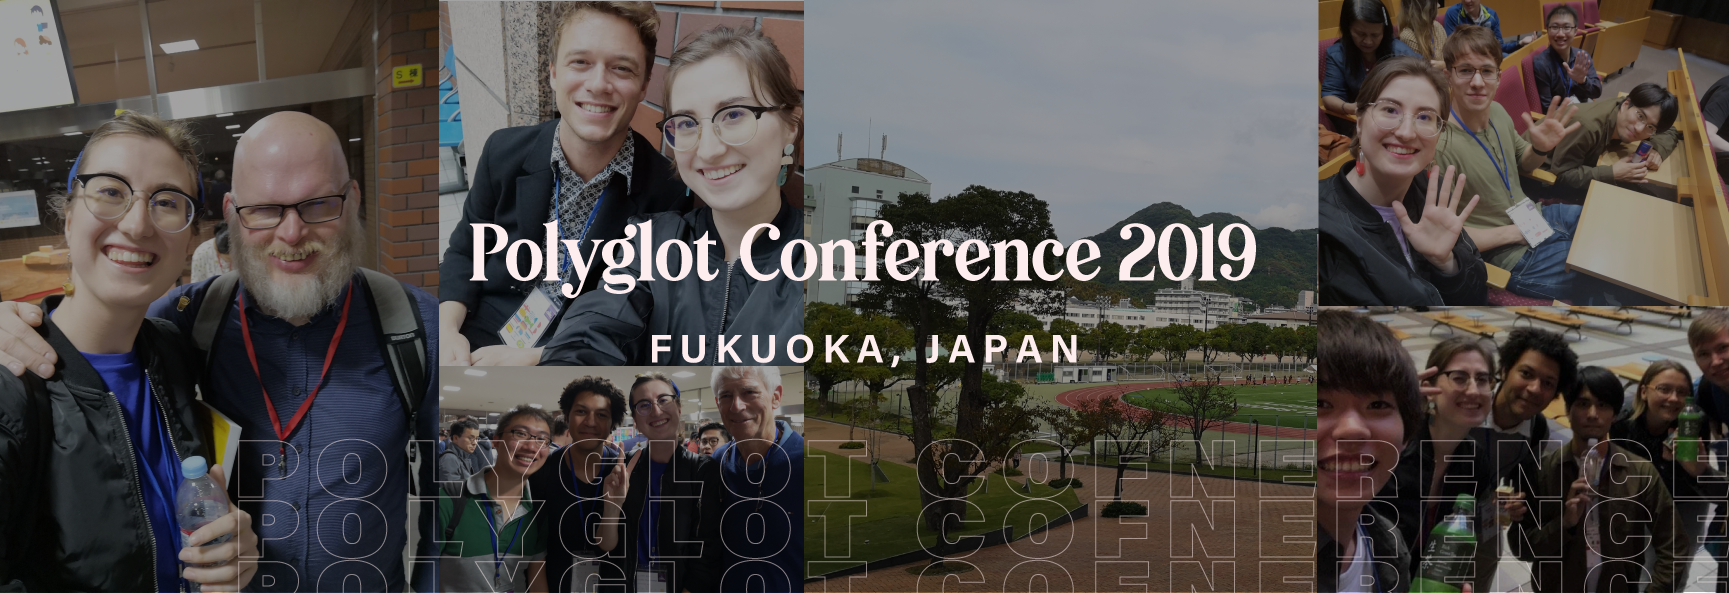 What I learnt at Polyglot Conference 2019